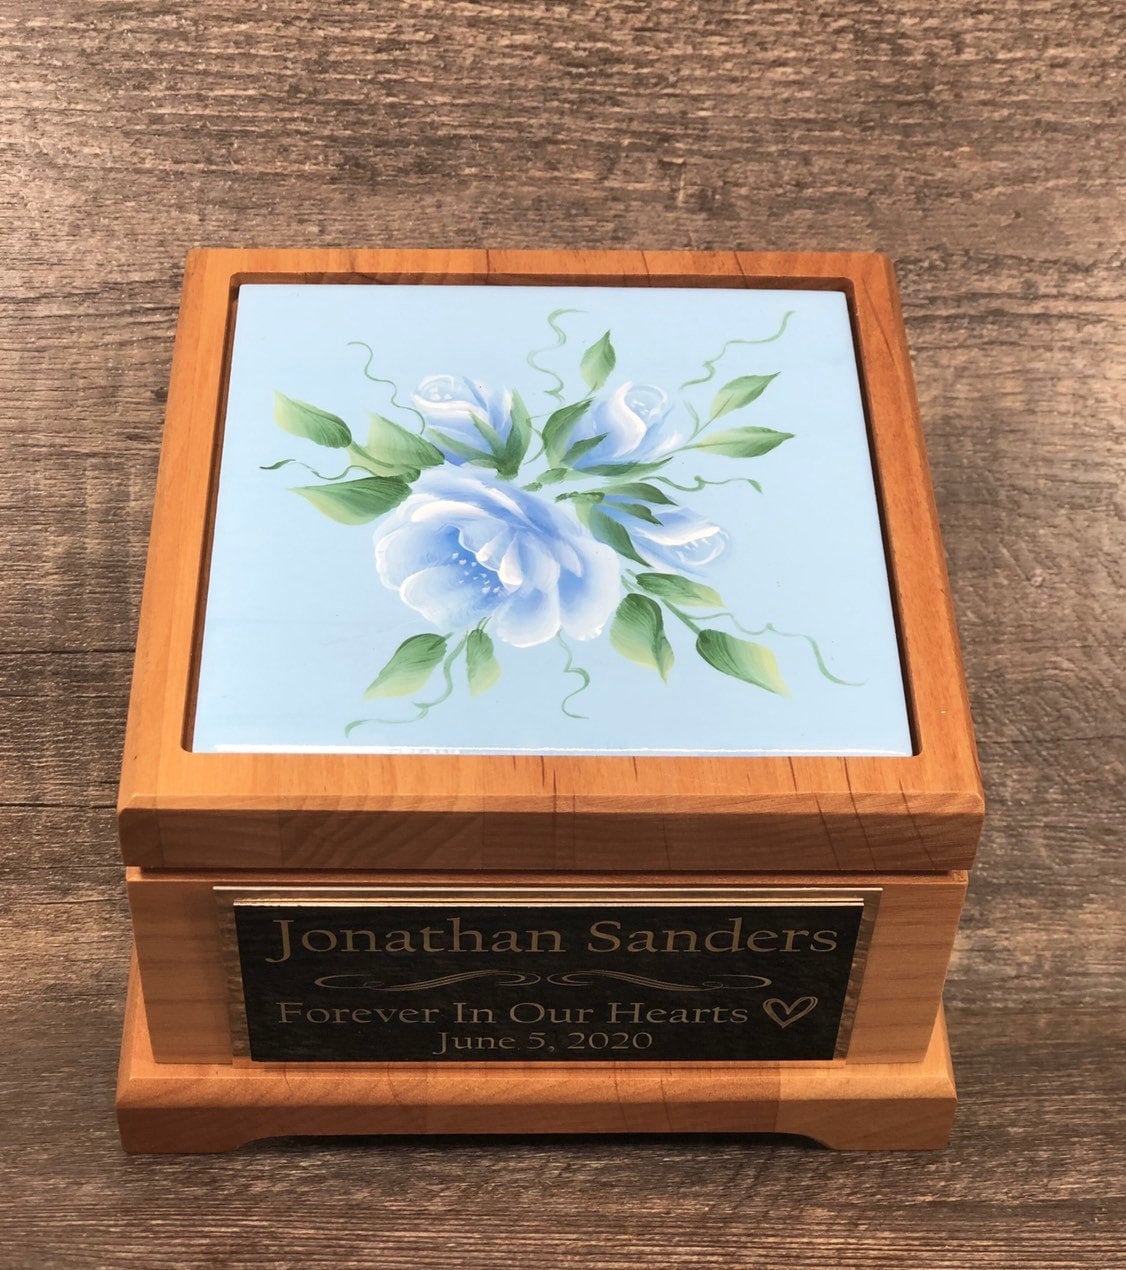 Baby Urn Hand Painted Blue Roses Boy Infant Child Urn For Ashes Baby Cremation Memorial Keepsake Human Personalized Engraved Tag Red Alder